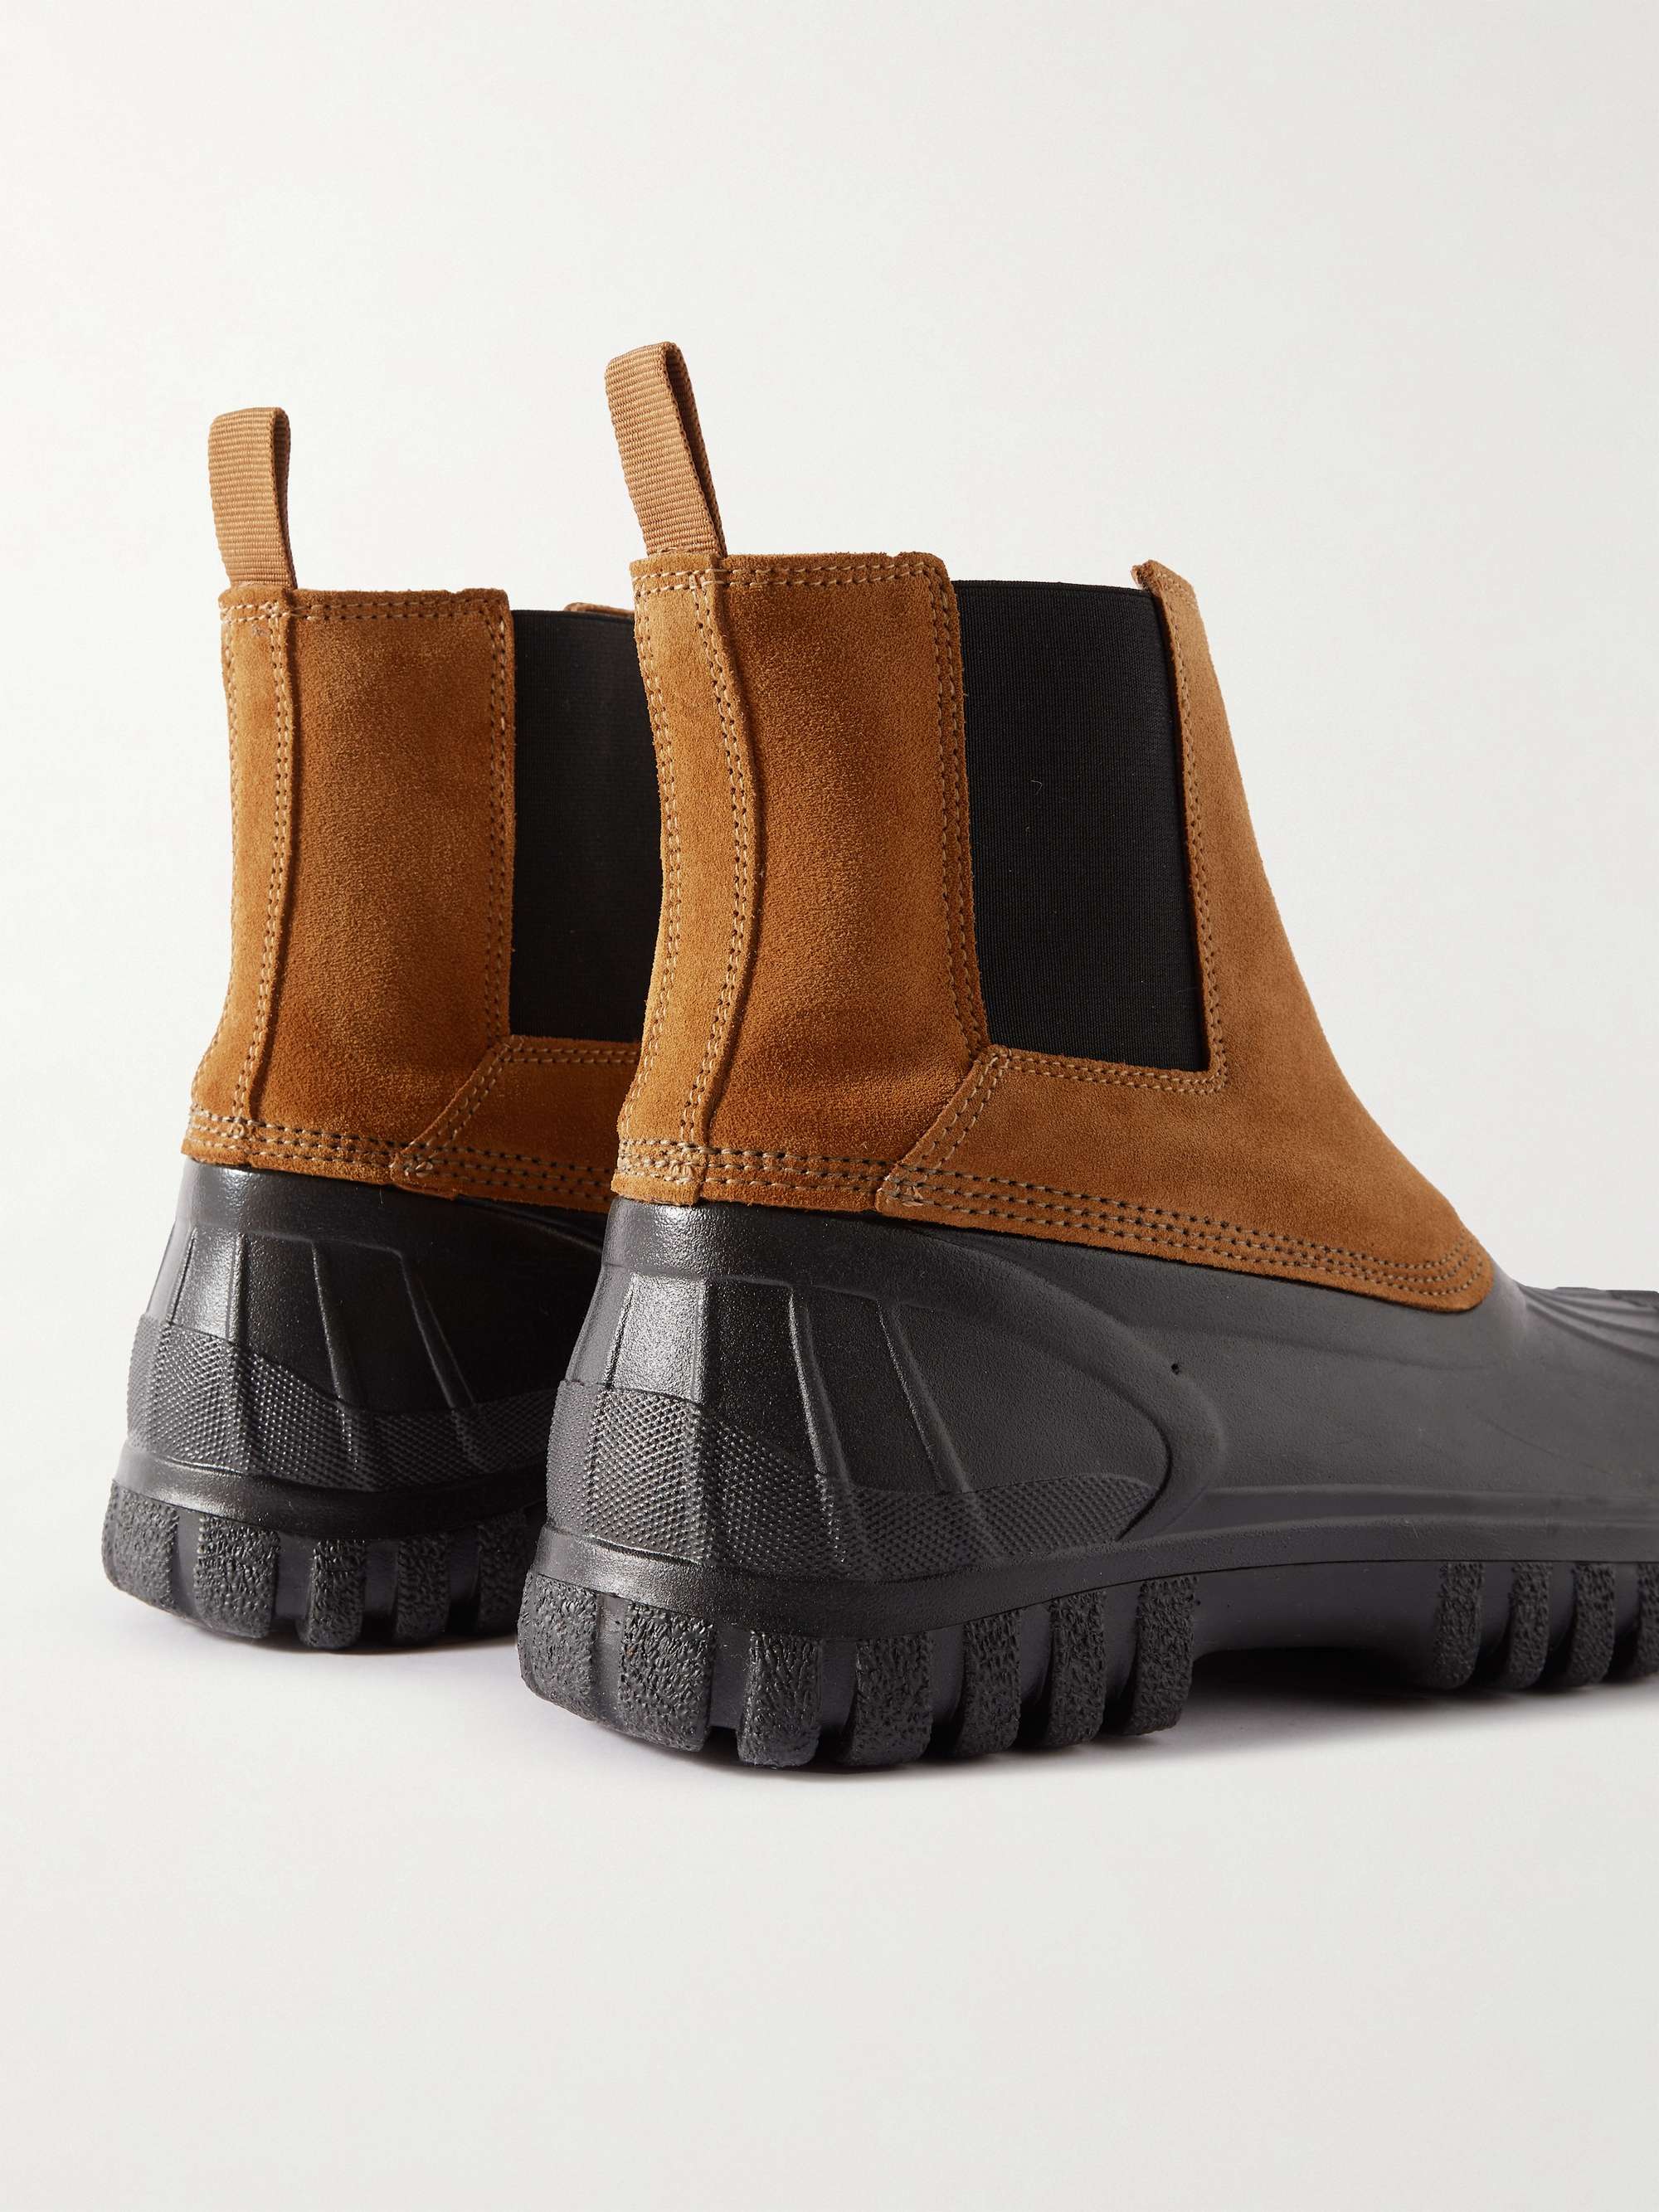 DIEMME Balbi Suede and Rubber Chelsea Boots